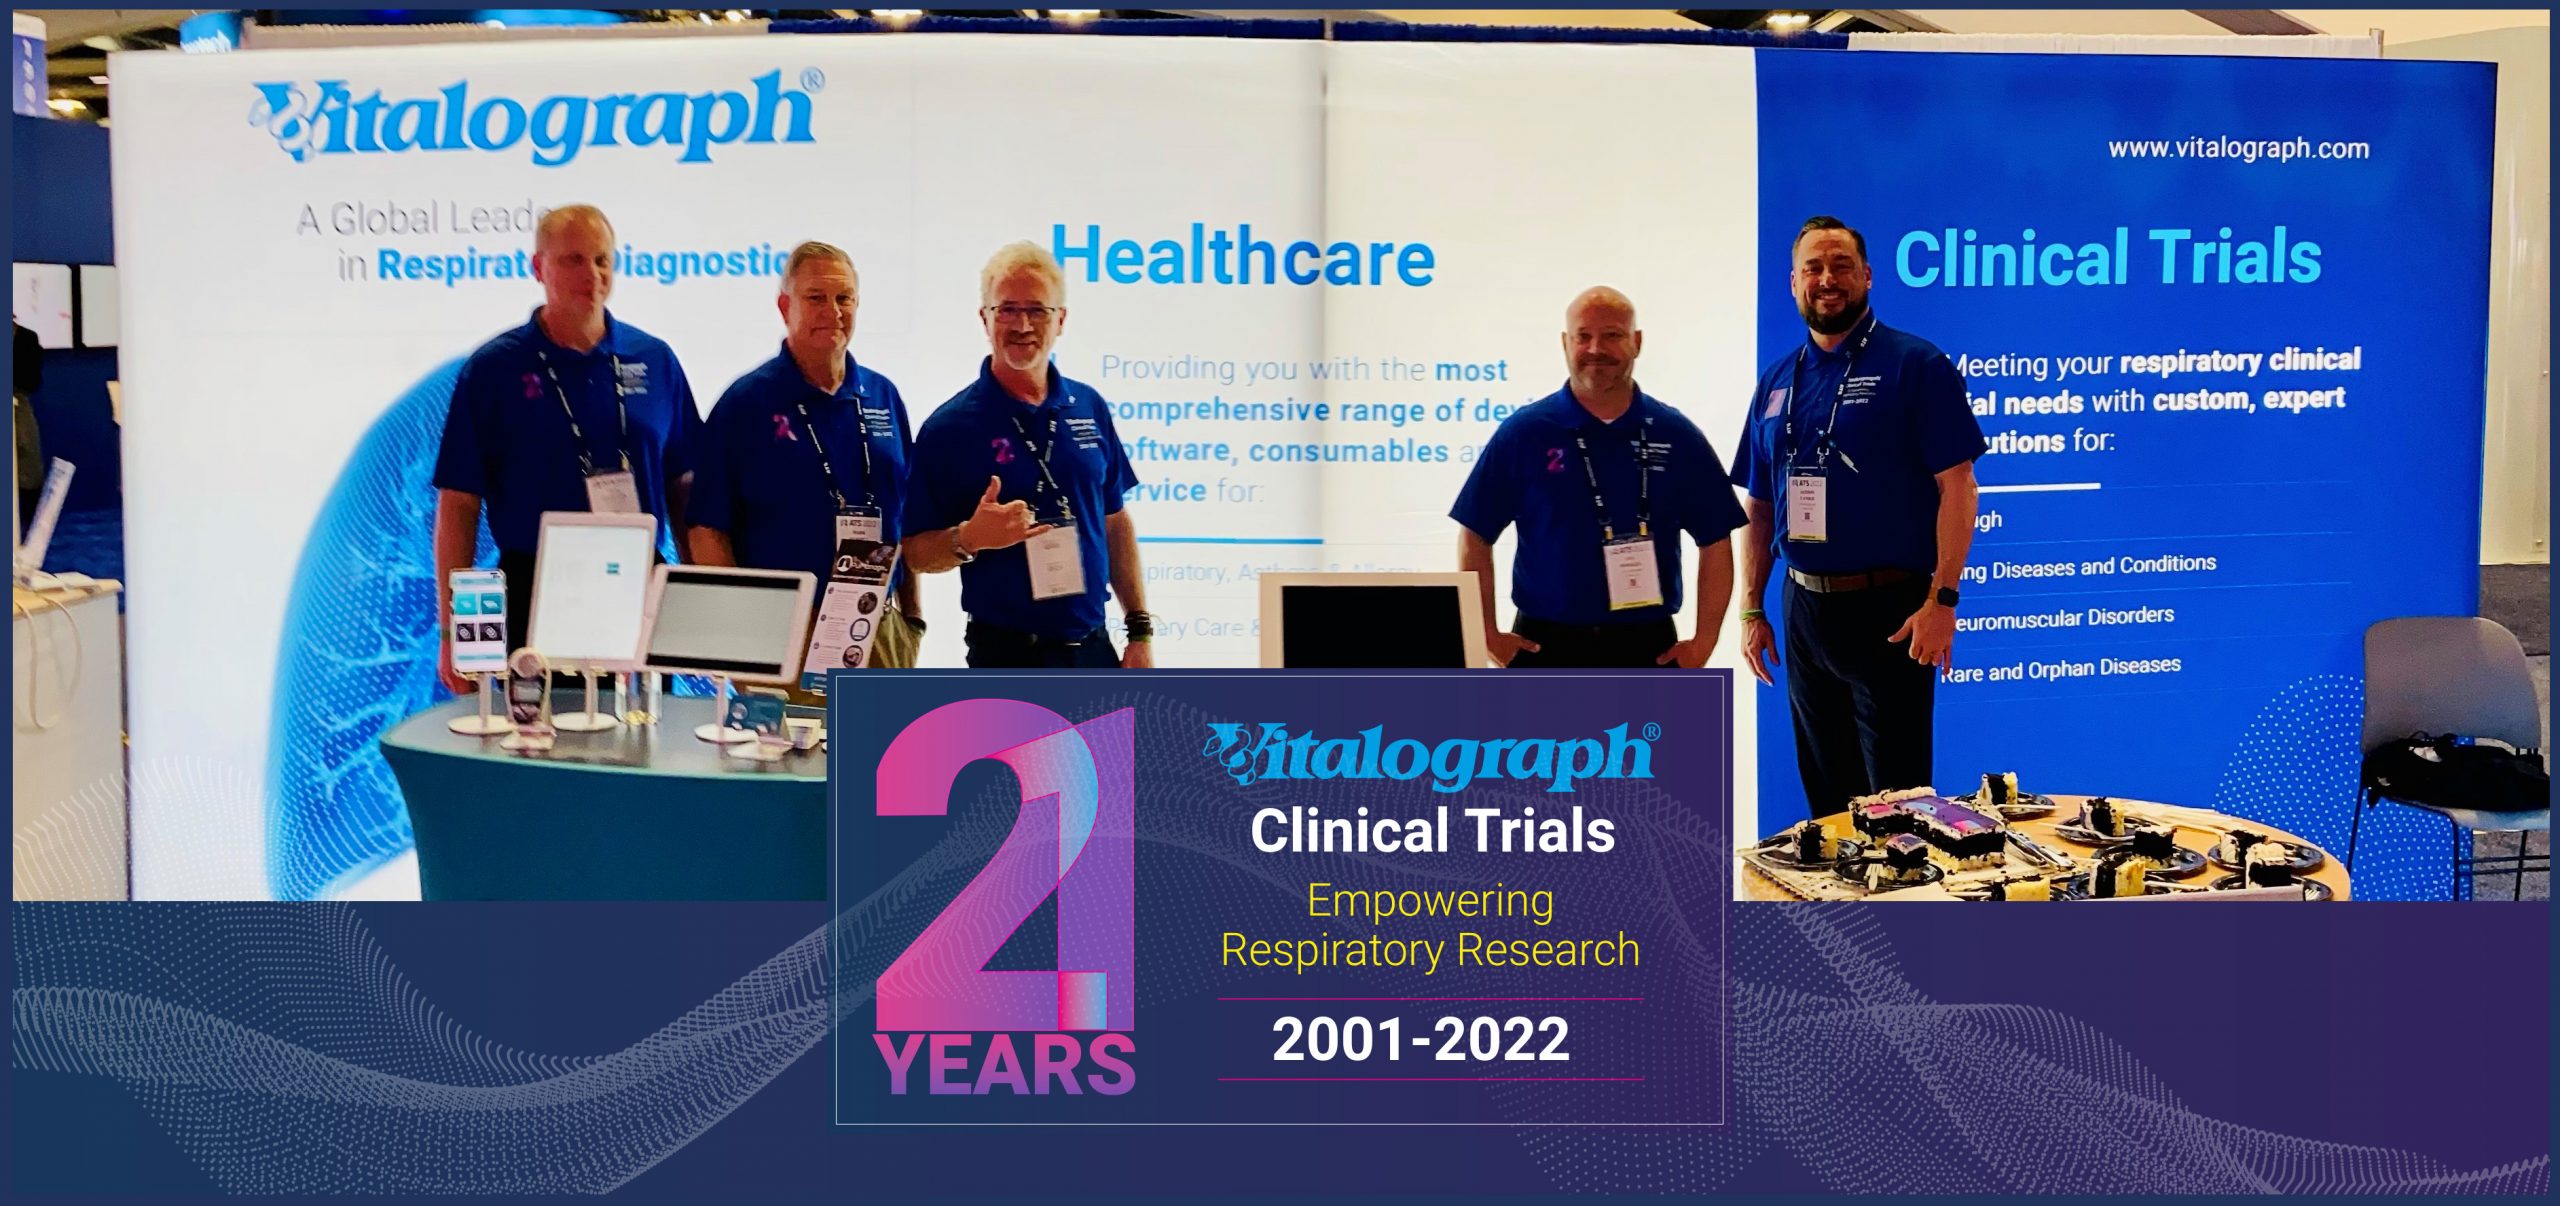 Vitalograph | Vitalograph celebrates 21 Years as a clinical trials service provider and reveals key to its success